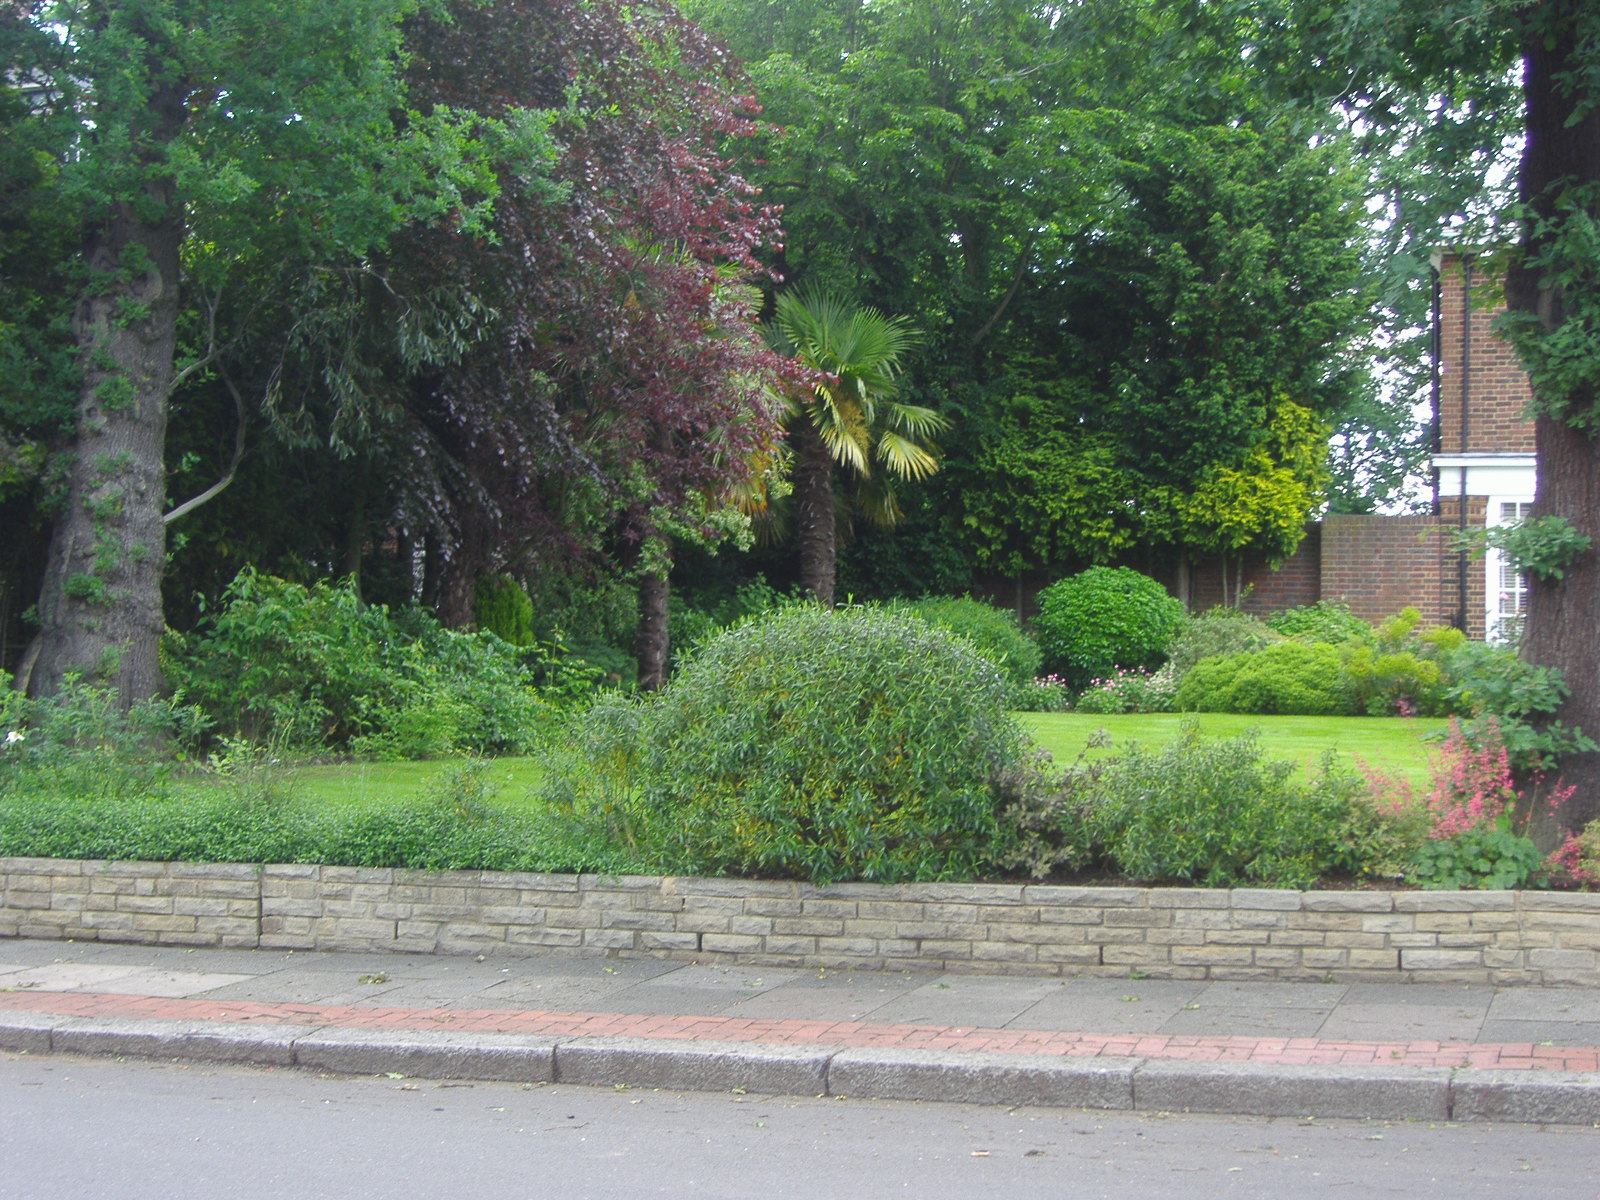 a lawn and trees are shown on the side of the road